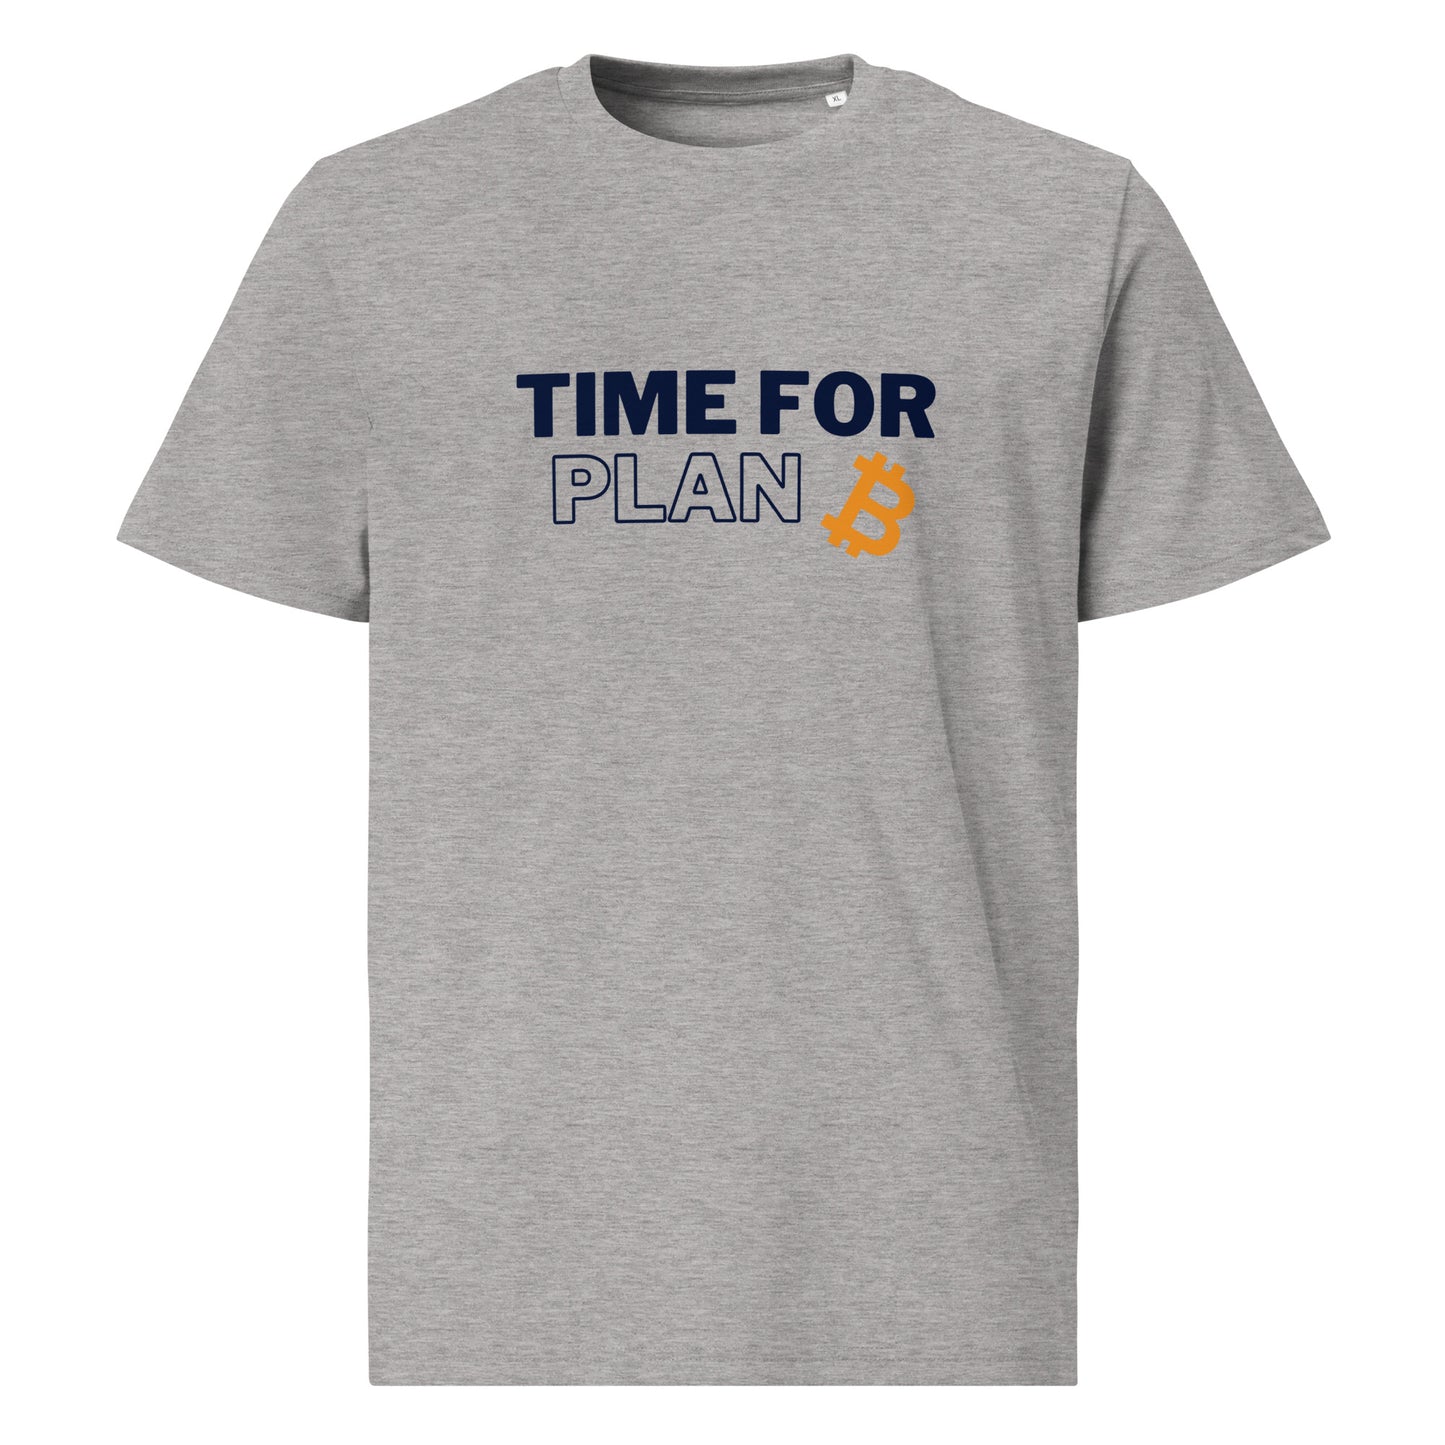 Time for Plan ₿